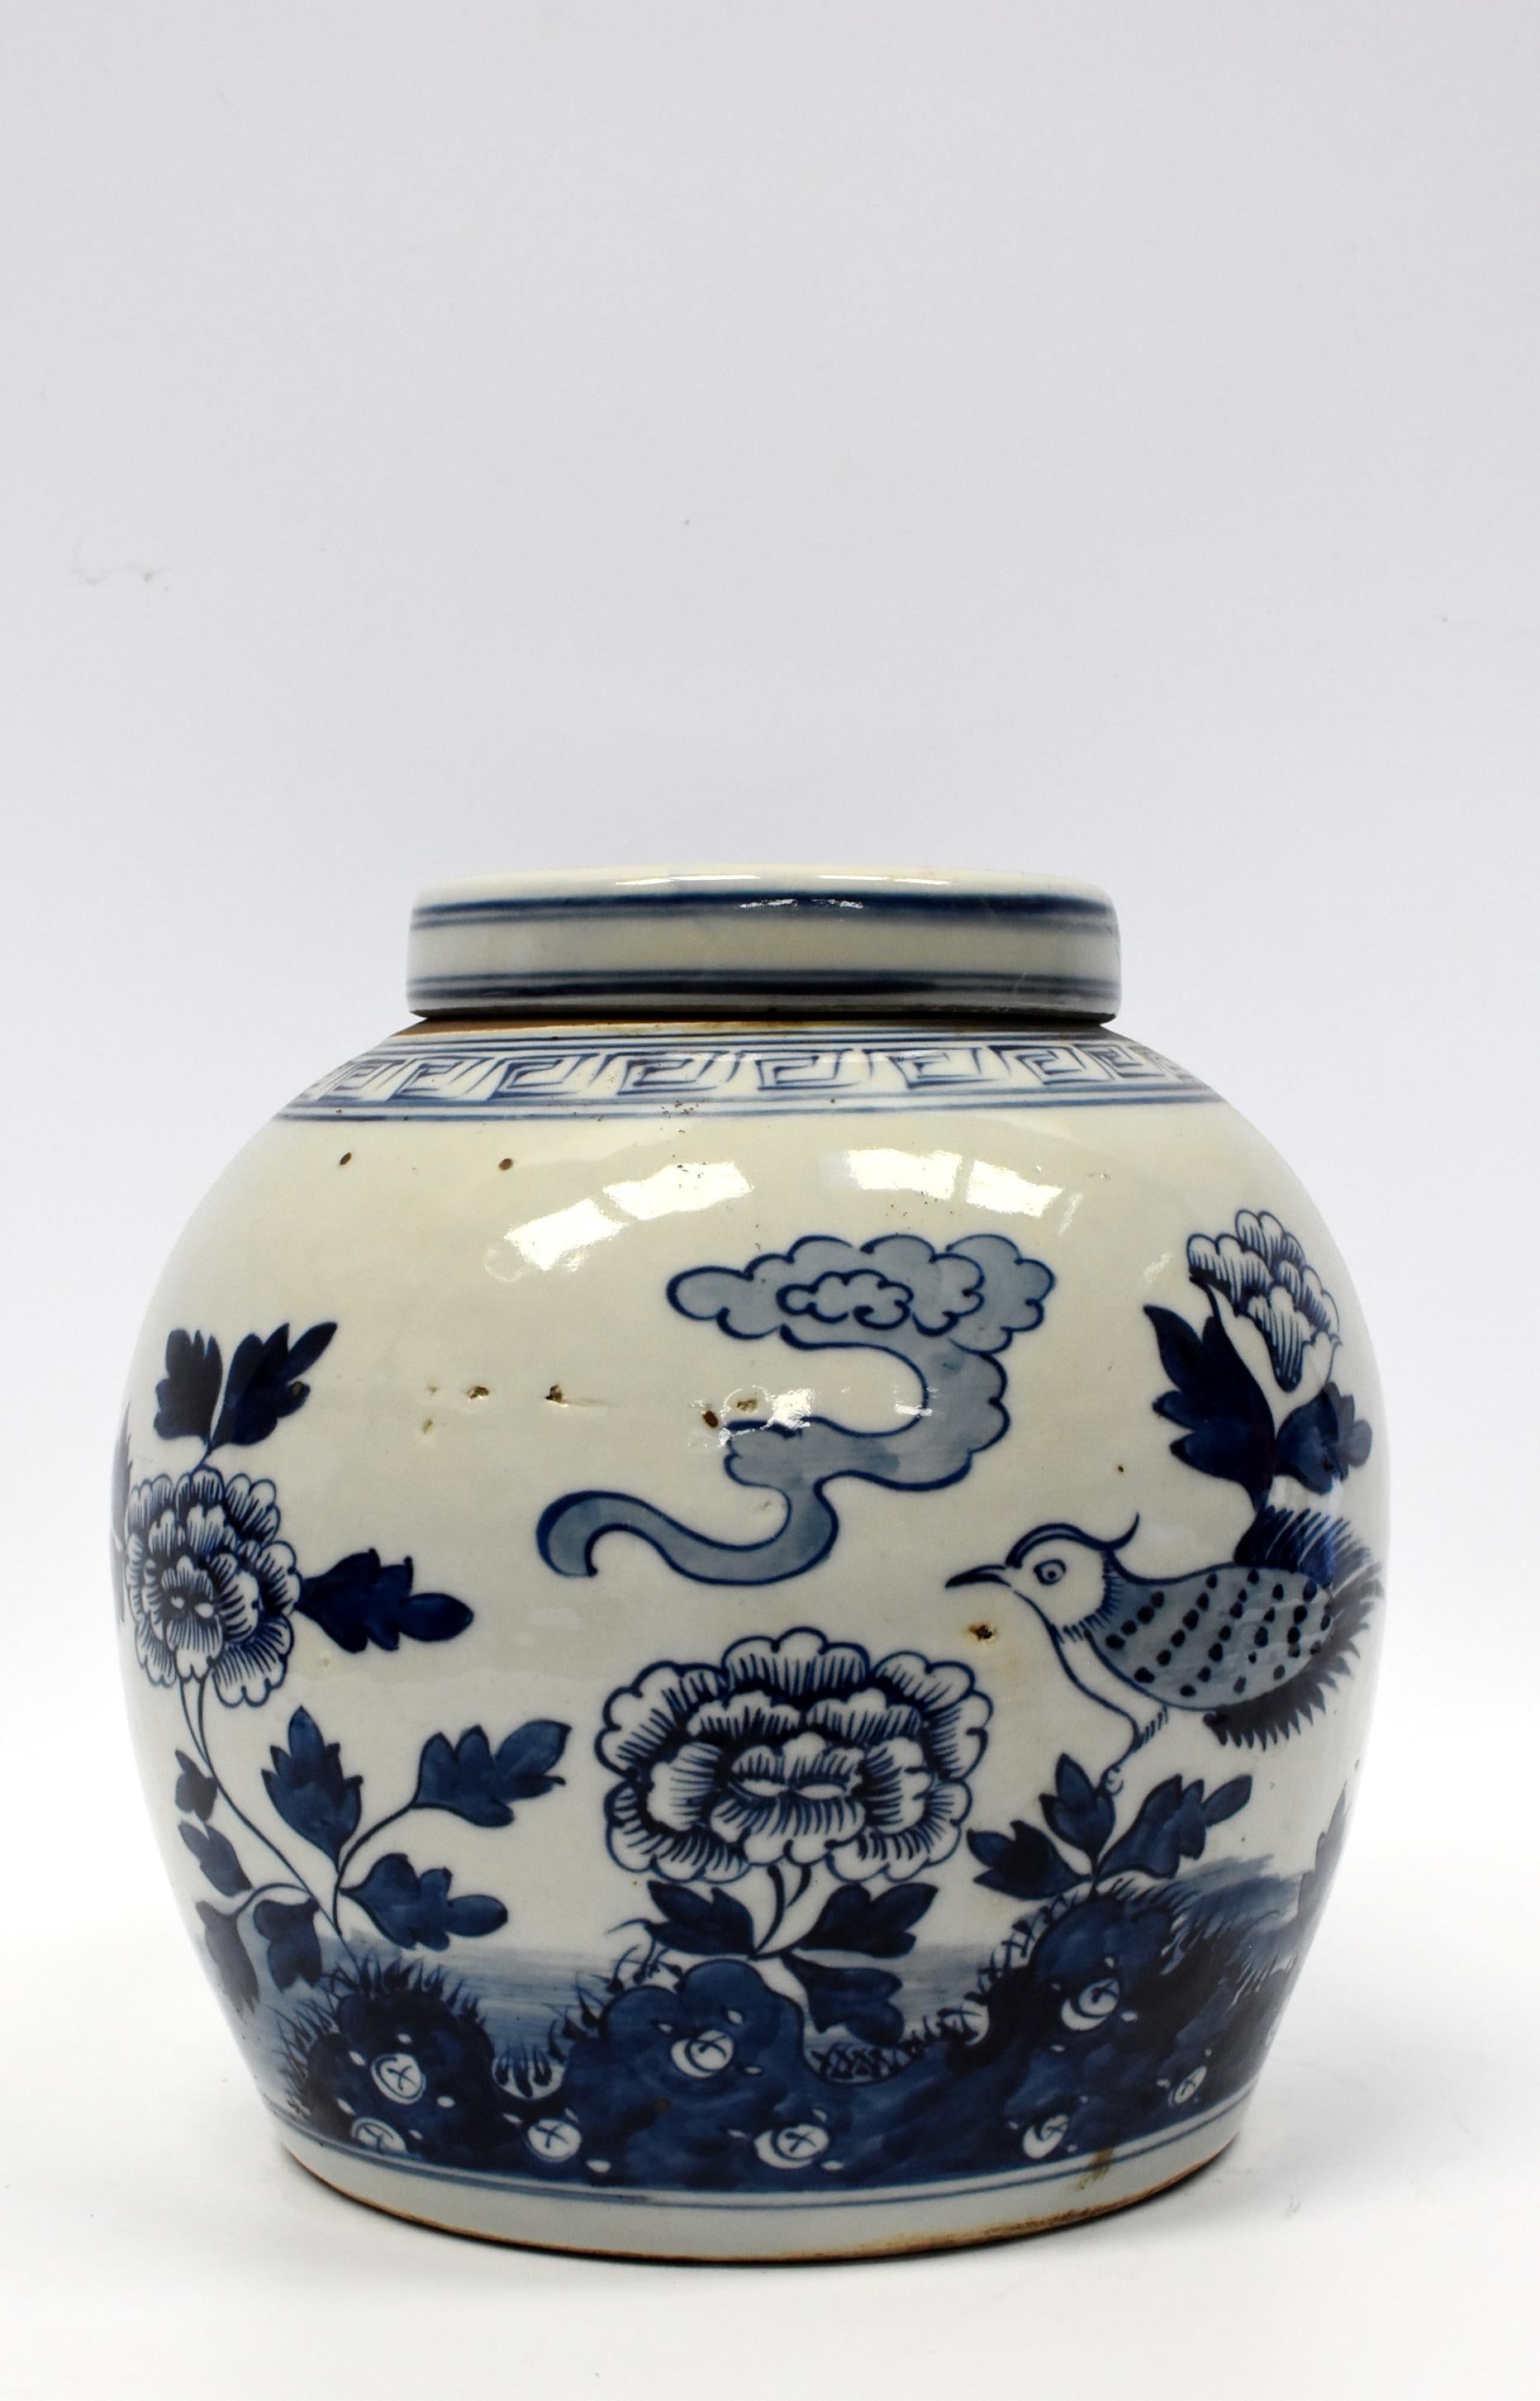 A beautiful 20th century Chinese blue and white ginger jar depicting a bird resting on top of a plant of peony. A ring of eternity scrolls decorate the area near the opening. Images are hand-painted. Bird symbolizes joy and peony good fortune. The